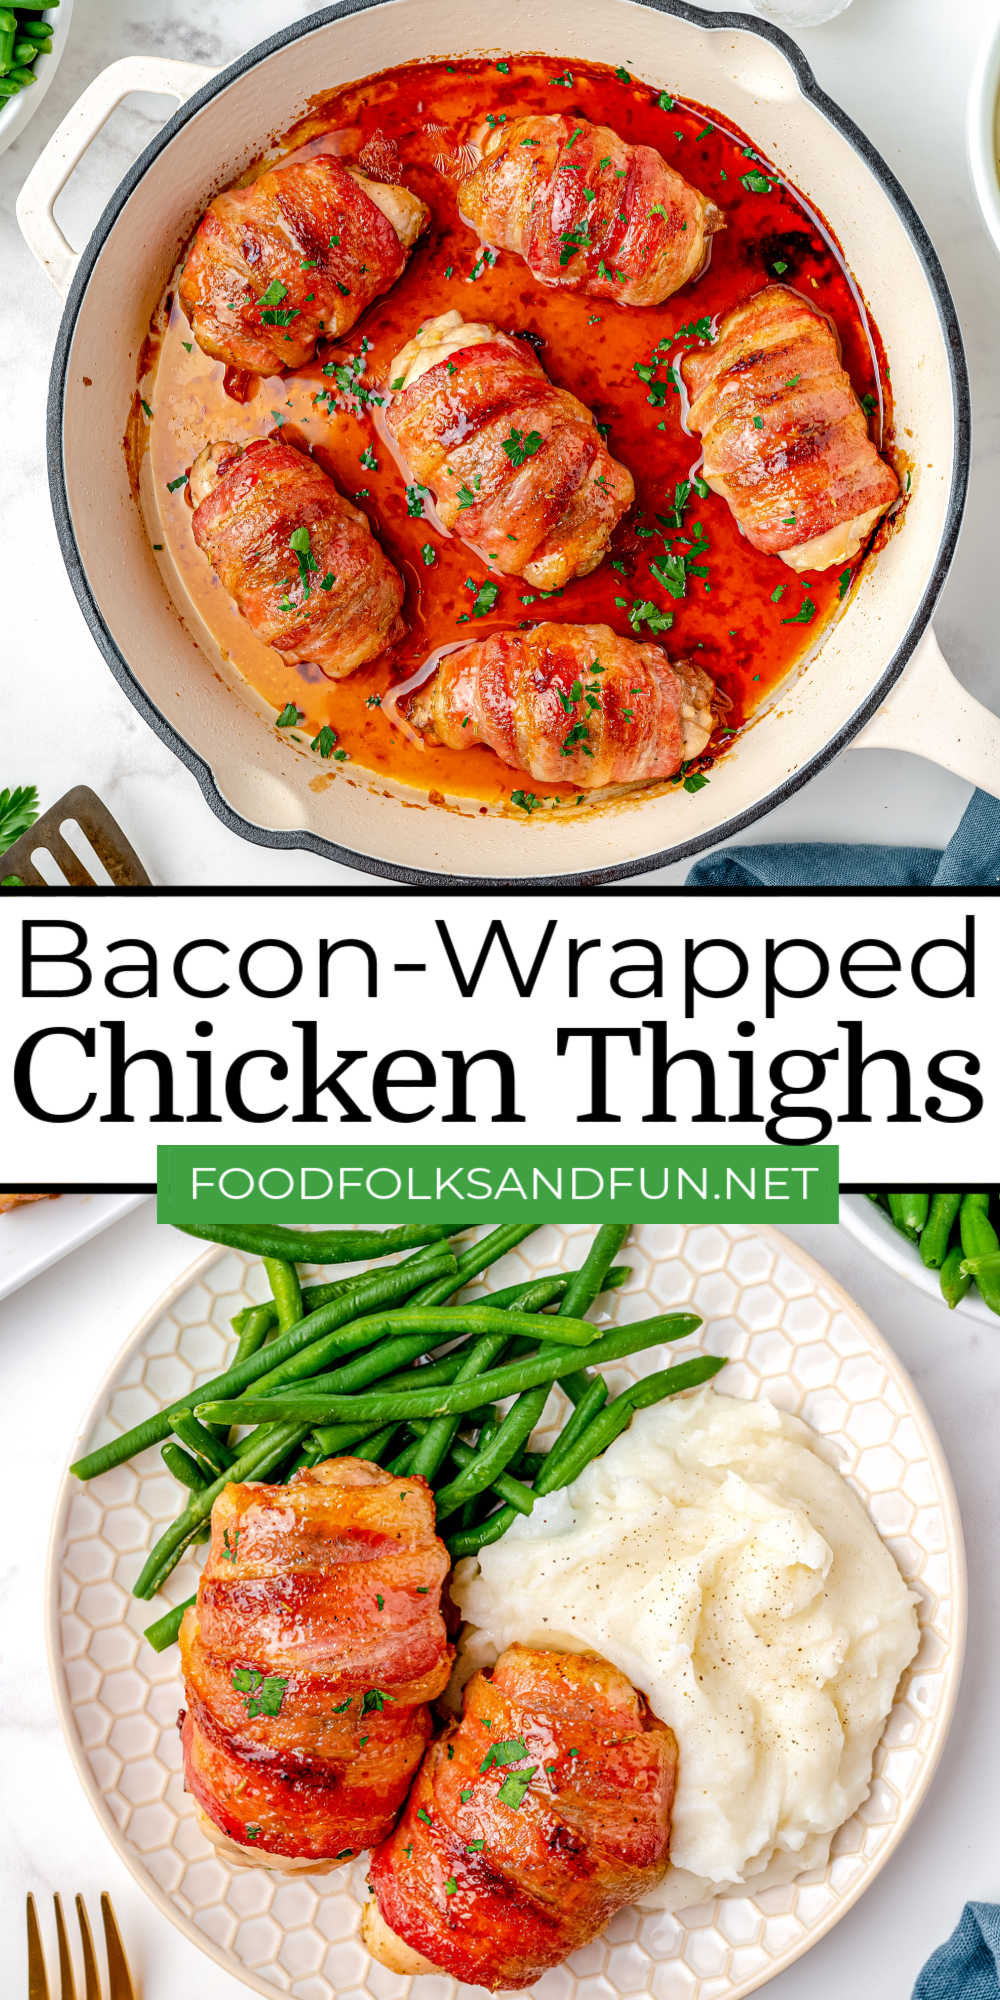 These Bacon Wrapped Chicken Thighs are guaranteed to get rave reviews and recipe requests. They’re juicy on the inside and wrapped in tasty brown sugar-coated bacon on the outside! via @foodfolksandfun